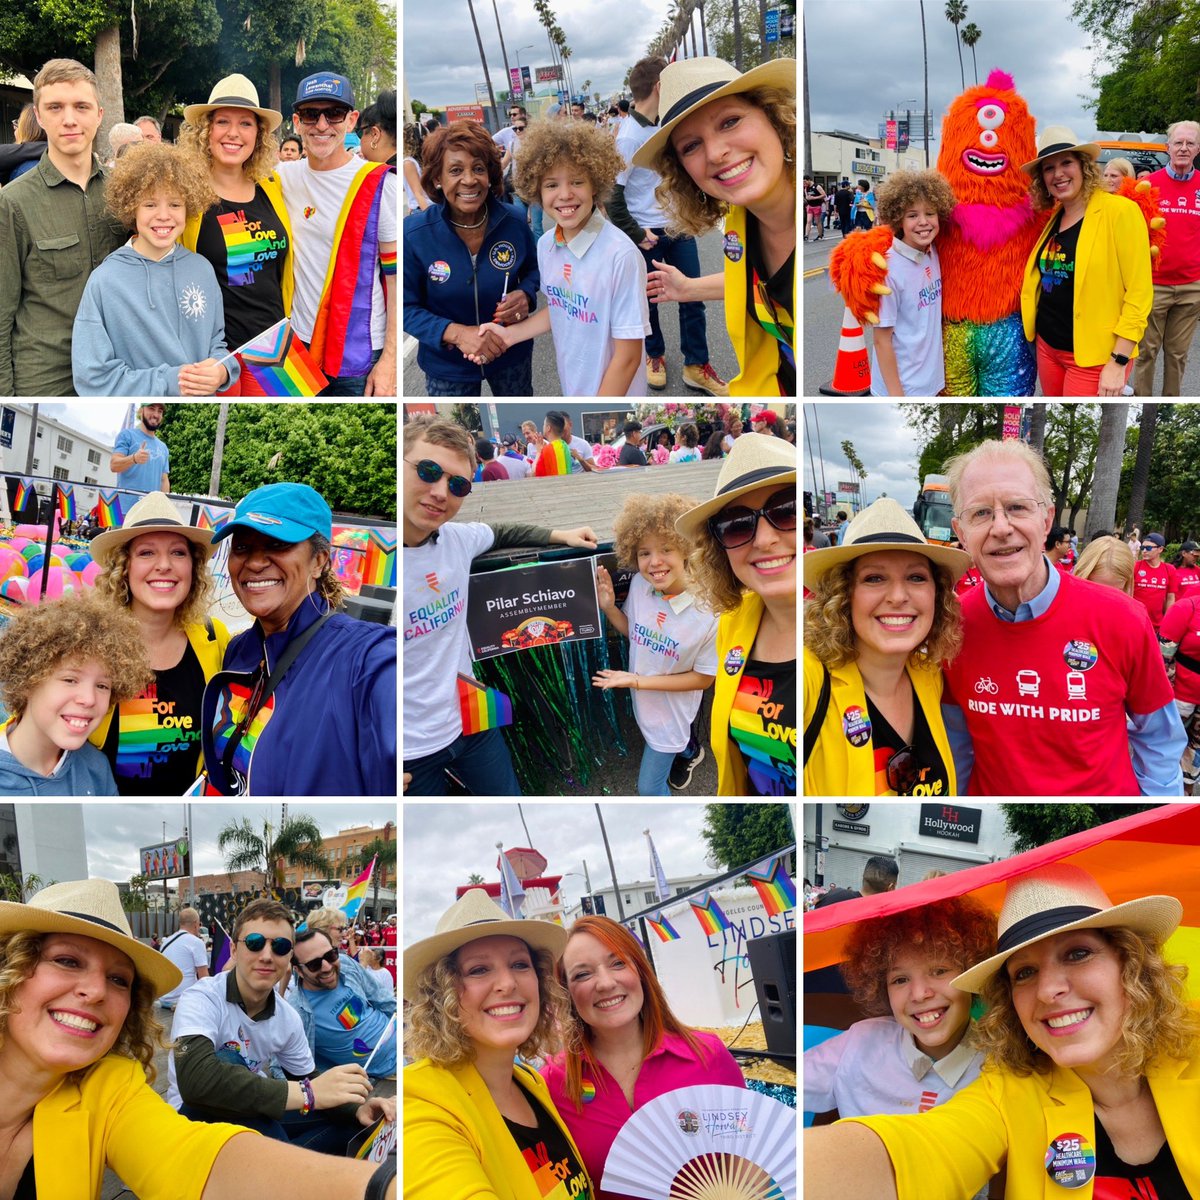 A beautiful day at #LAPride showing so much love for all in our community with @RepMaxineWaters @AsmLowenthal @_HollyJMitchell @LindseyPHorvath @BenAllenCA @metrolaalerts and @eqca!